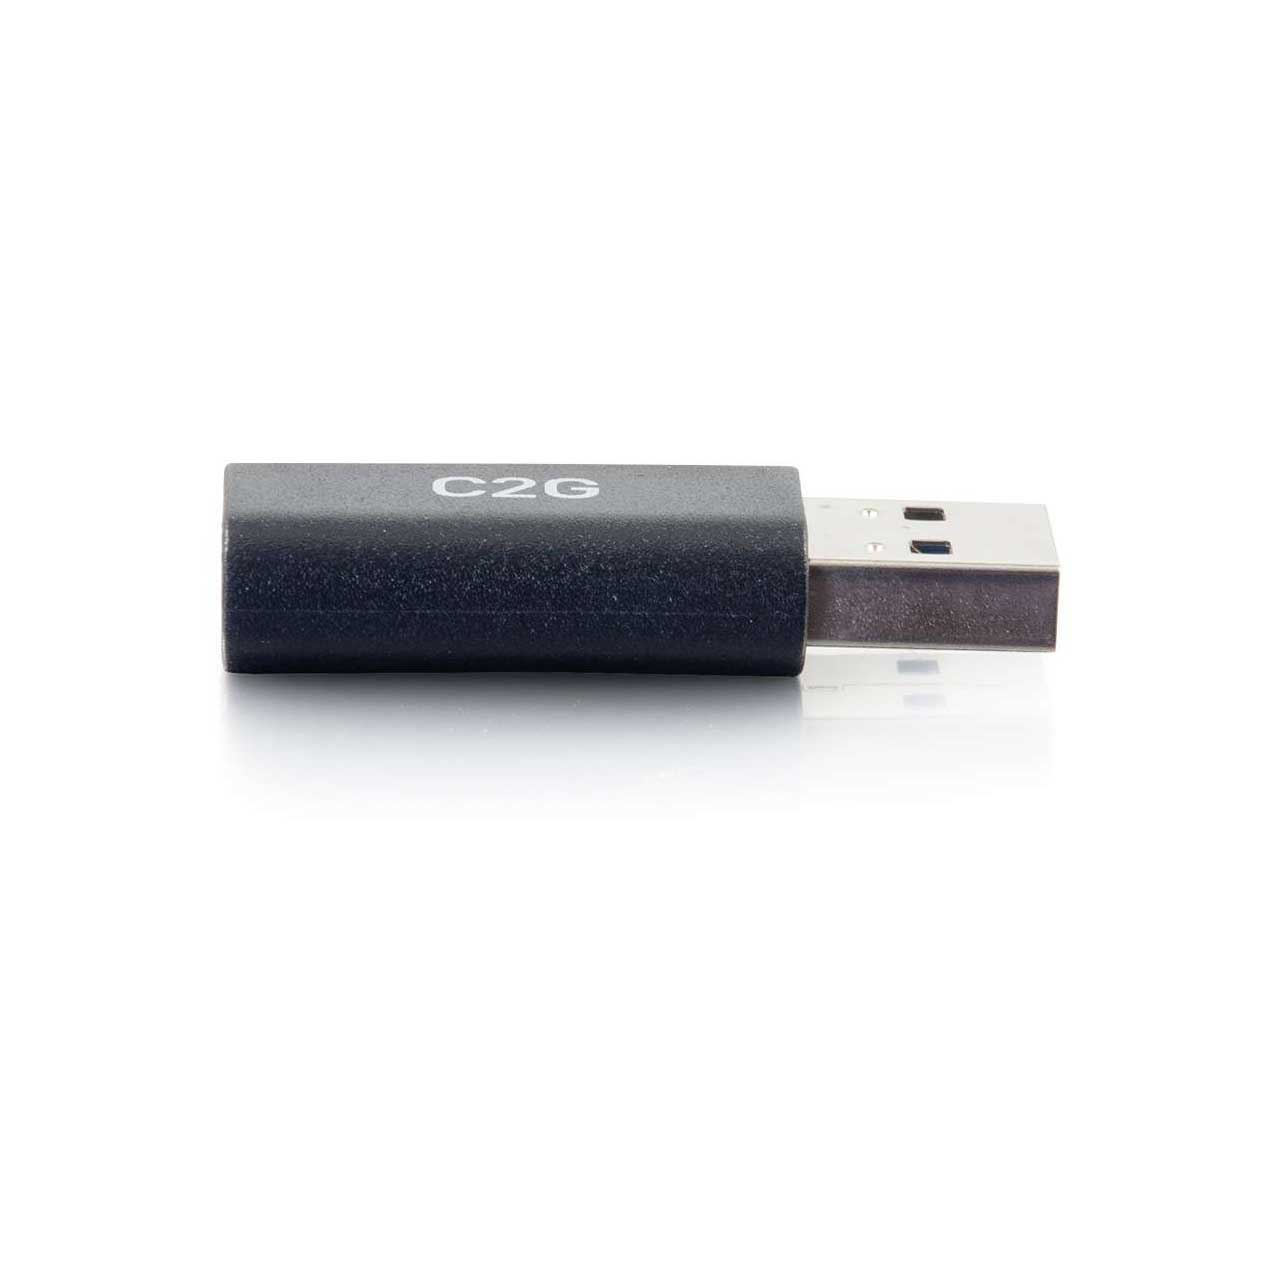 C2G USB C to USB Adapter - USB C to USB A SuperSpeed Adapter - 5Gbps - M/F  - 54427 - Cable Connectors 